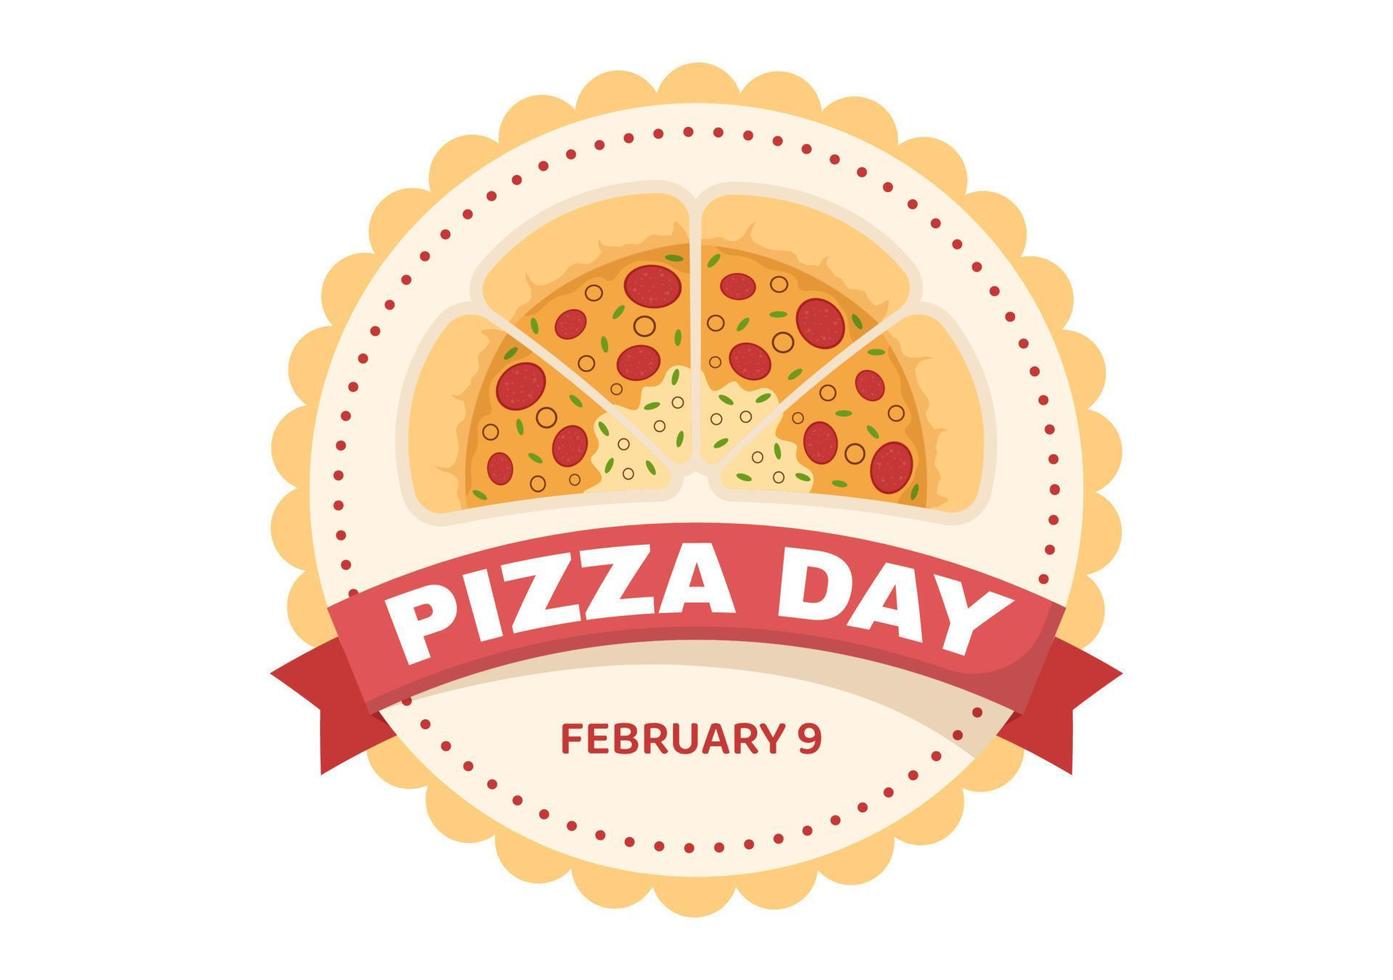 National Pizza Day on Celebration February 9 by Consuming Various Slice in Flat Cartoon Style Background Hand Drawn Templates Illustration vector